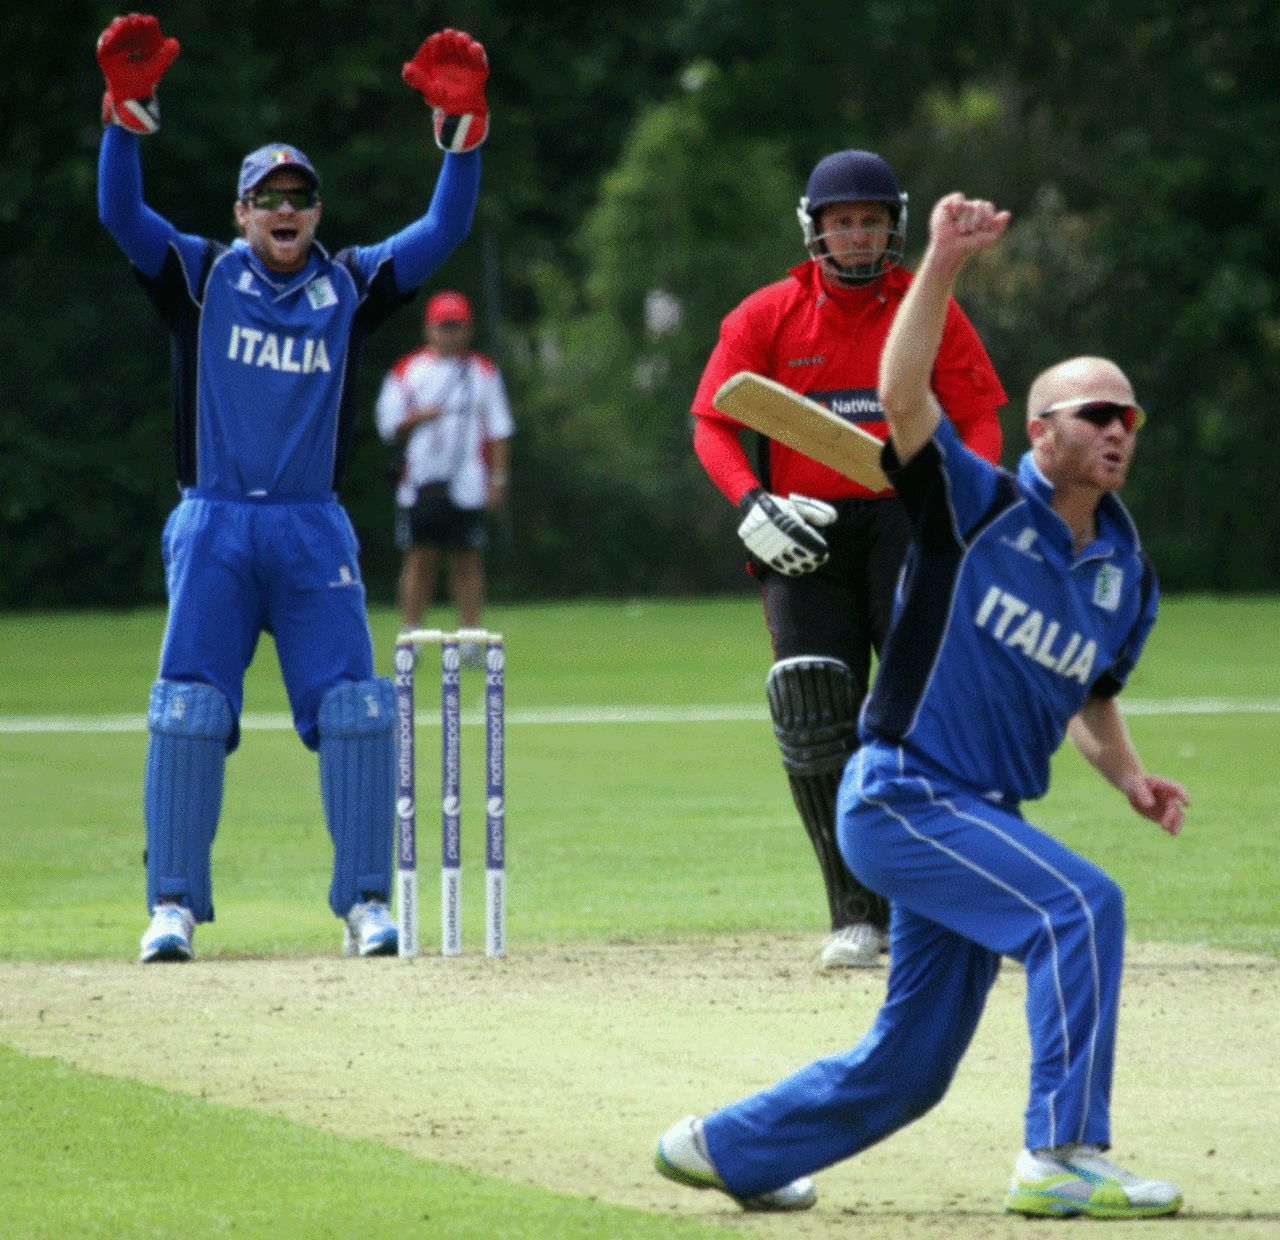 Italy's Hayden Patrizi and Andrew Northcote appeal for an lbw, Gibraltar v Italy, St Peter Port, European Championship Division One Twenty20, July 21, 2011